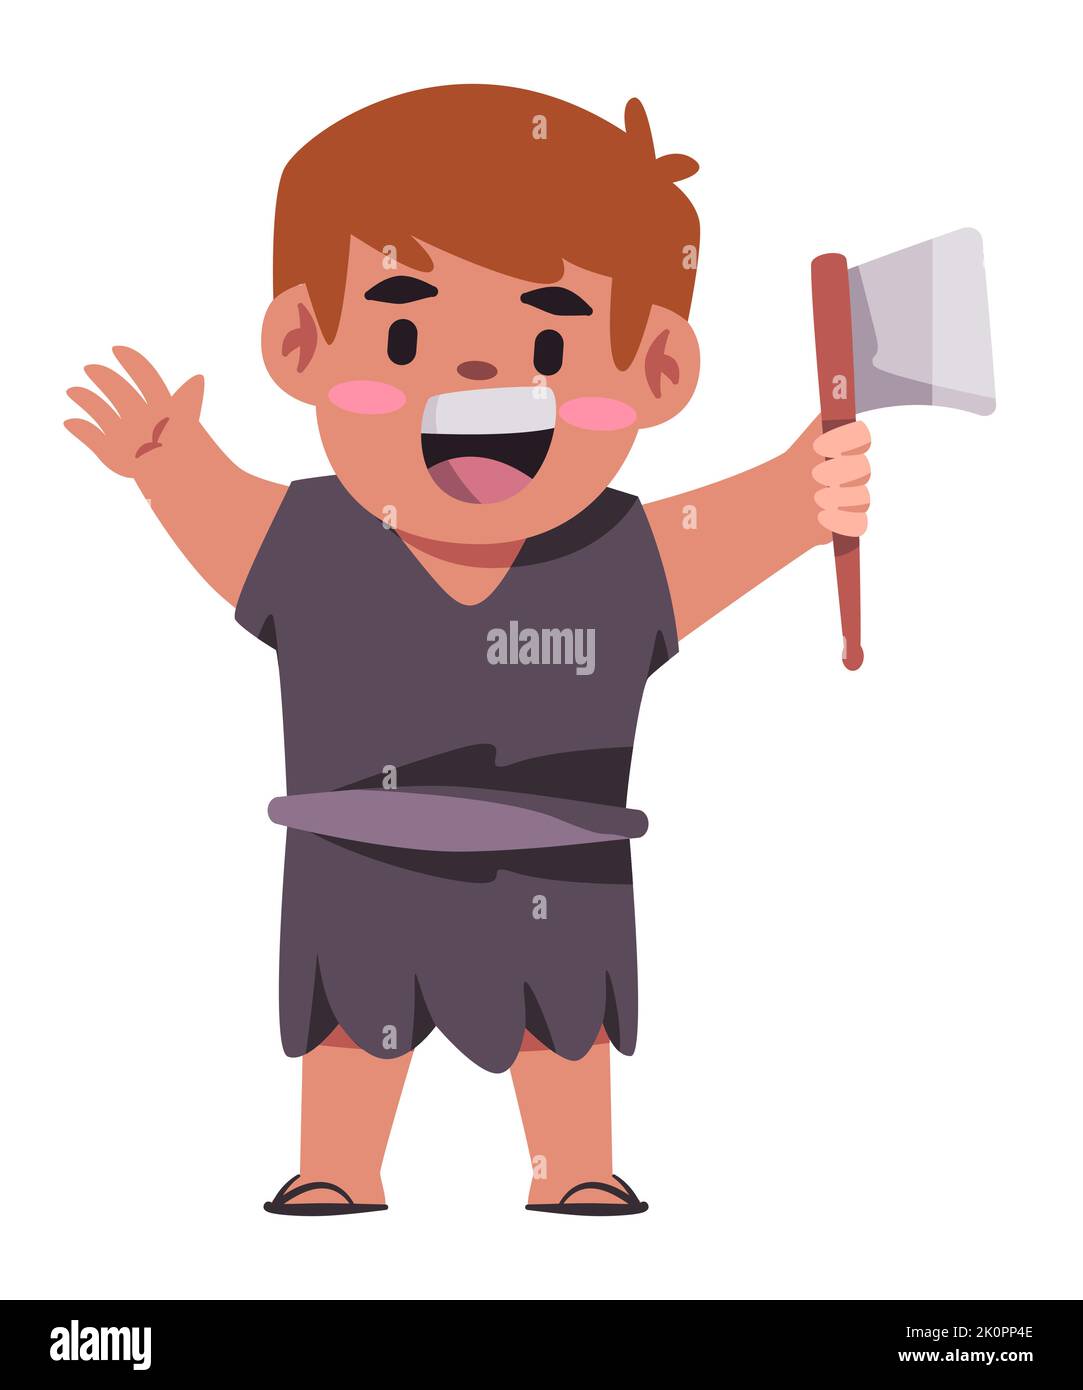 Kids prehistoric holding axe made of rock or stone standing and smile Stock Vector